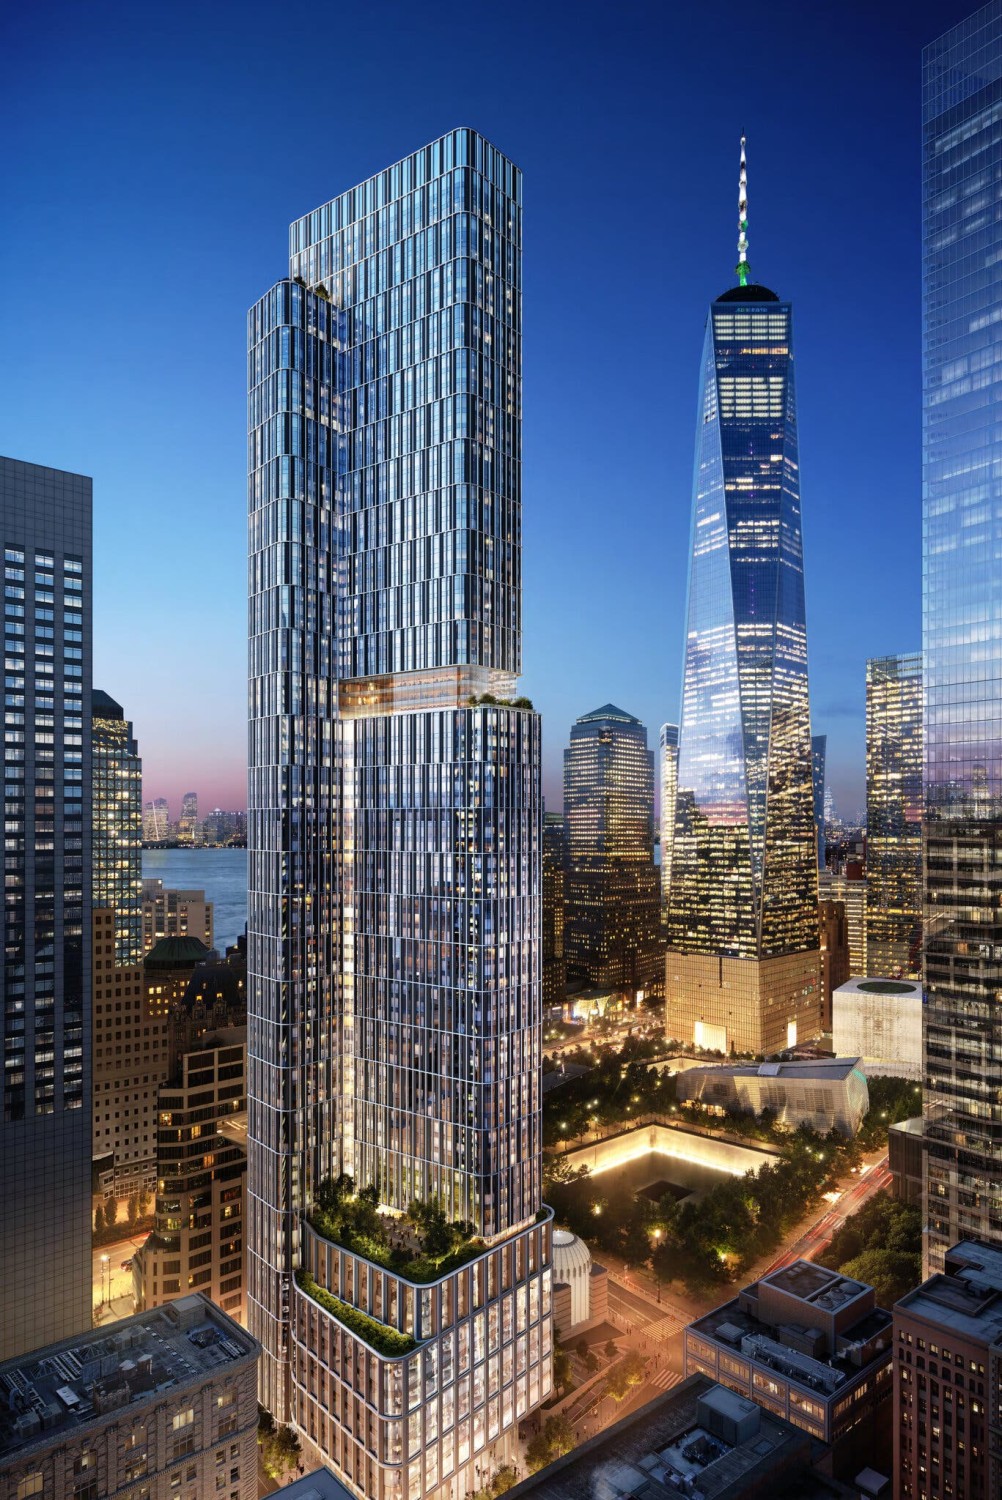 A rendering of a new tower planned for the World Trade Center campus, where a third of the apartments would be targeted at lower-income renters.Credit...New York Governor’s Office